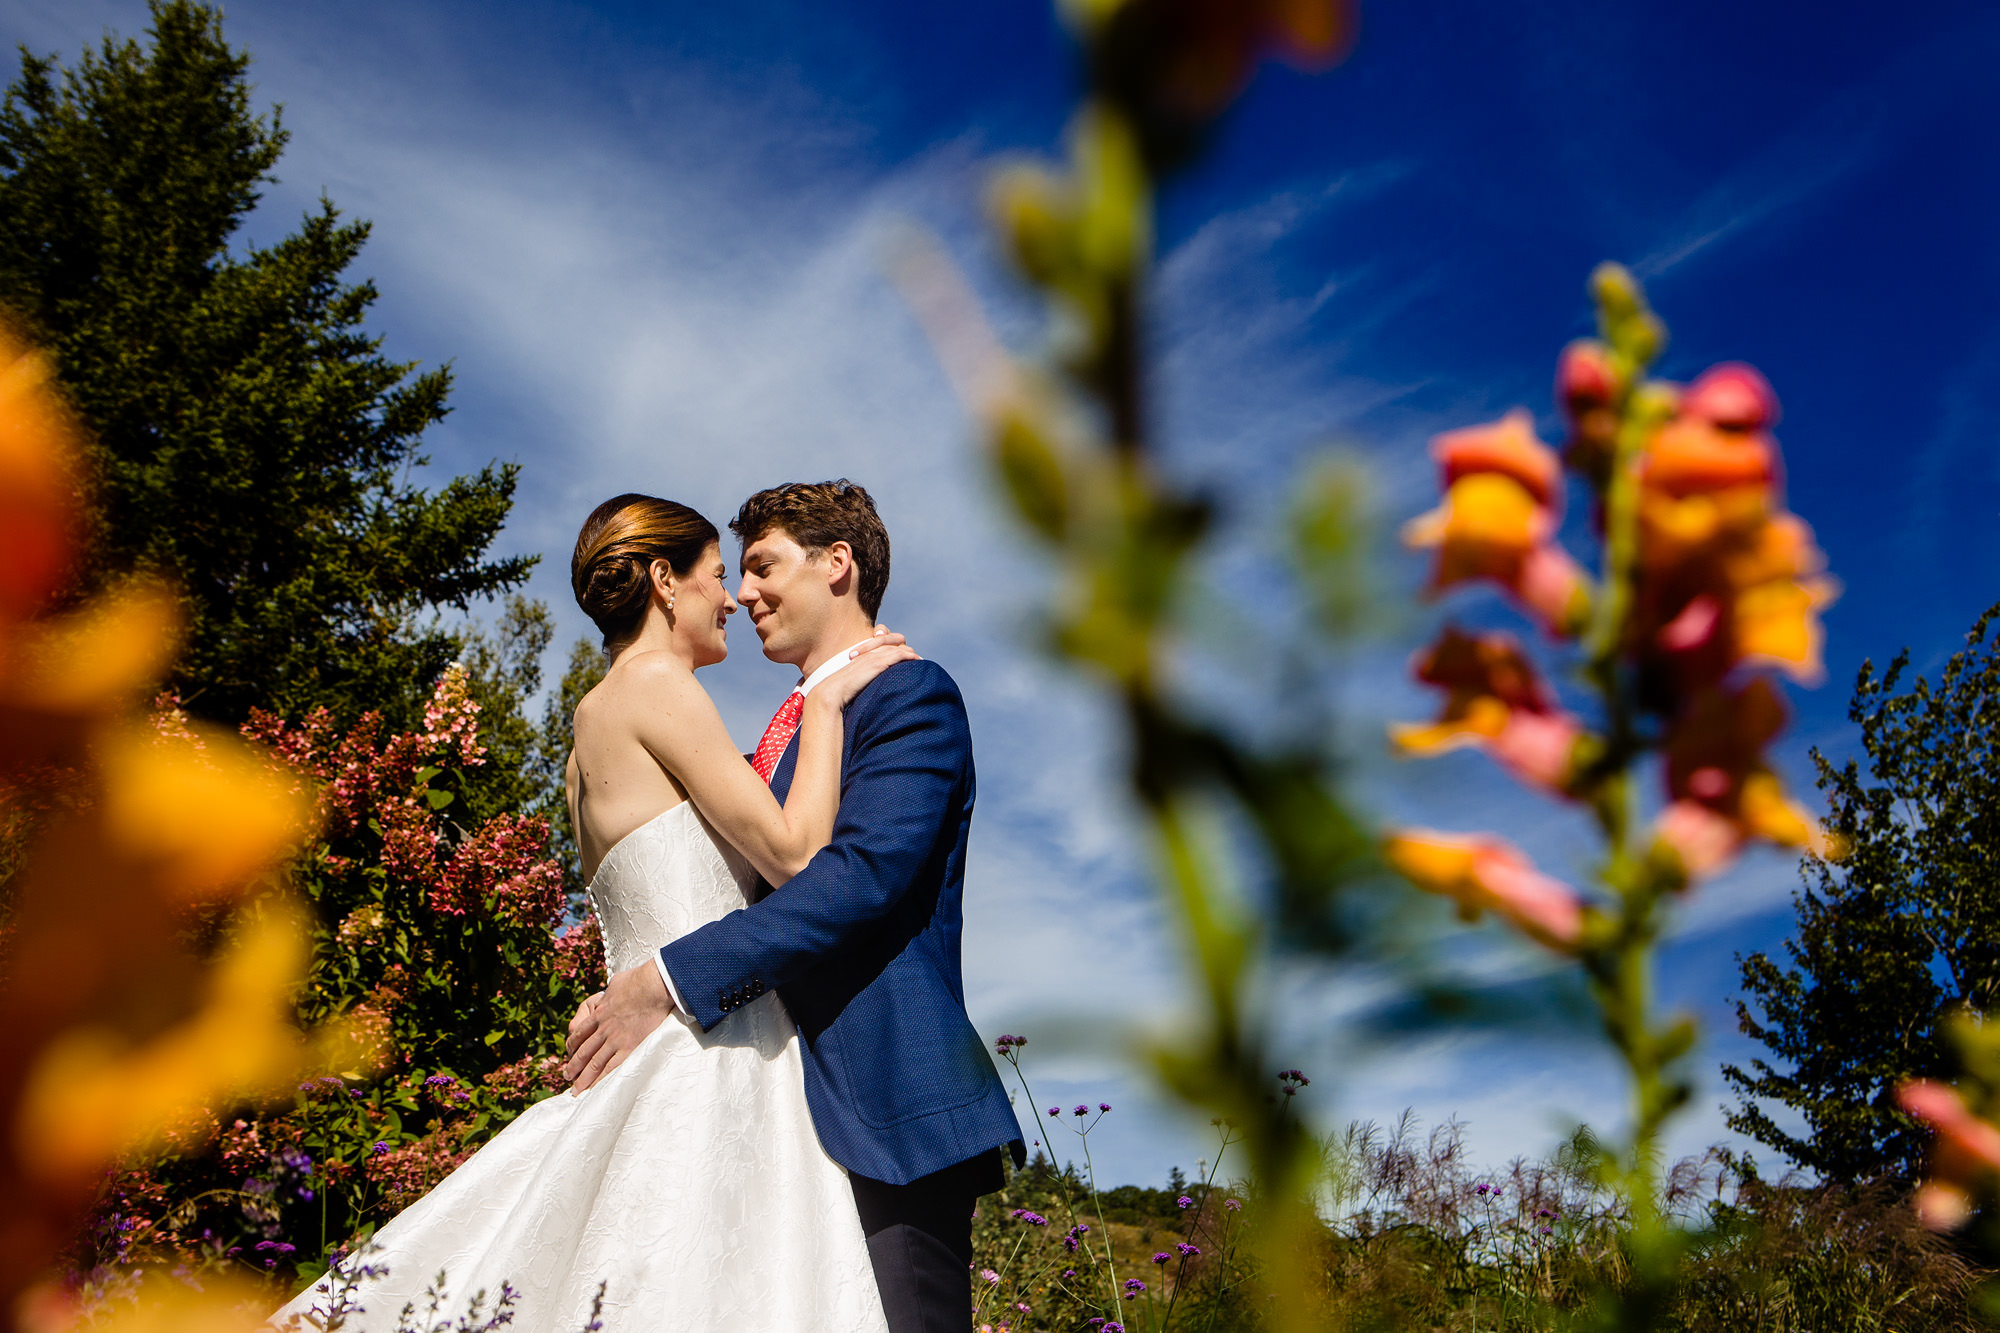 Bride and groom portraits in a garden at a Blue Hill Maine wedding